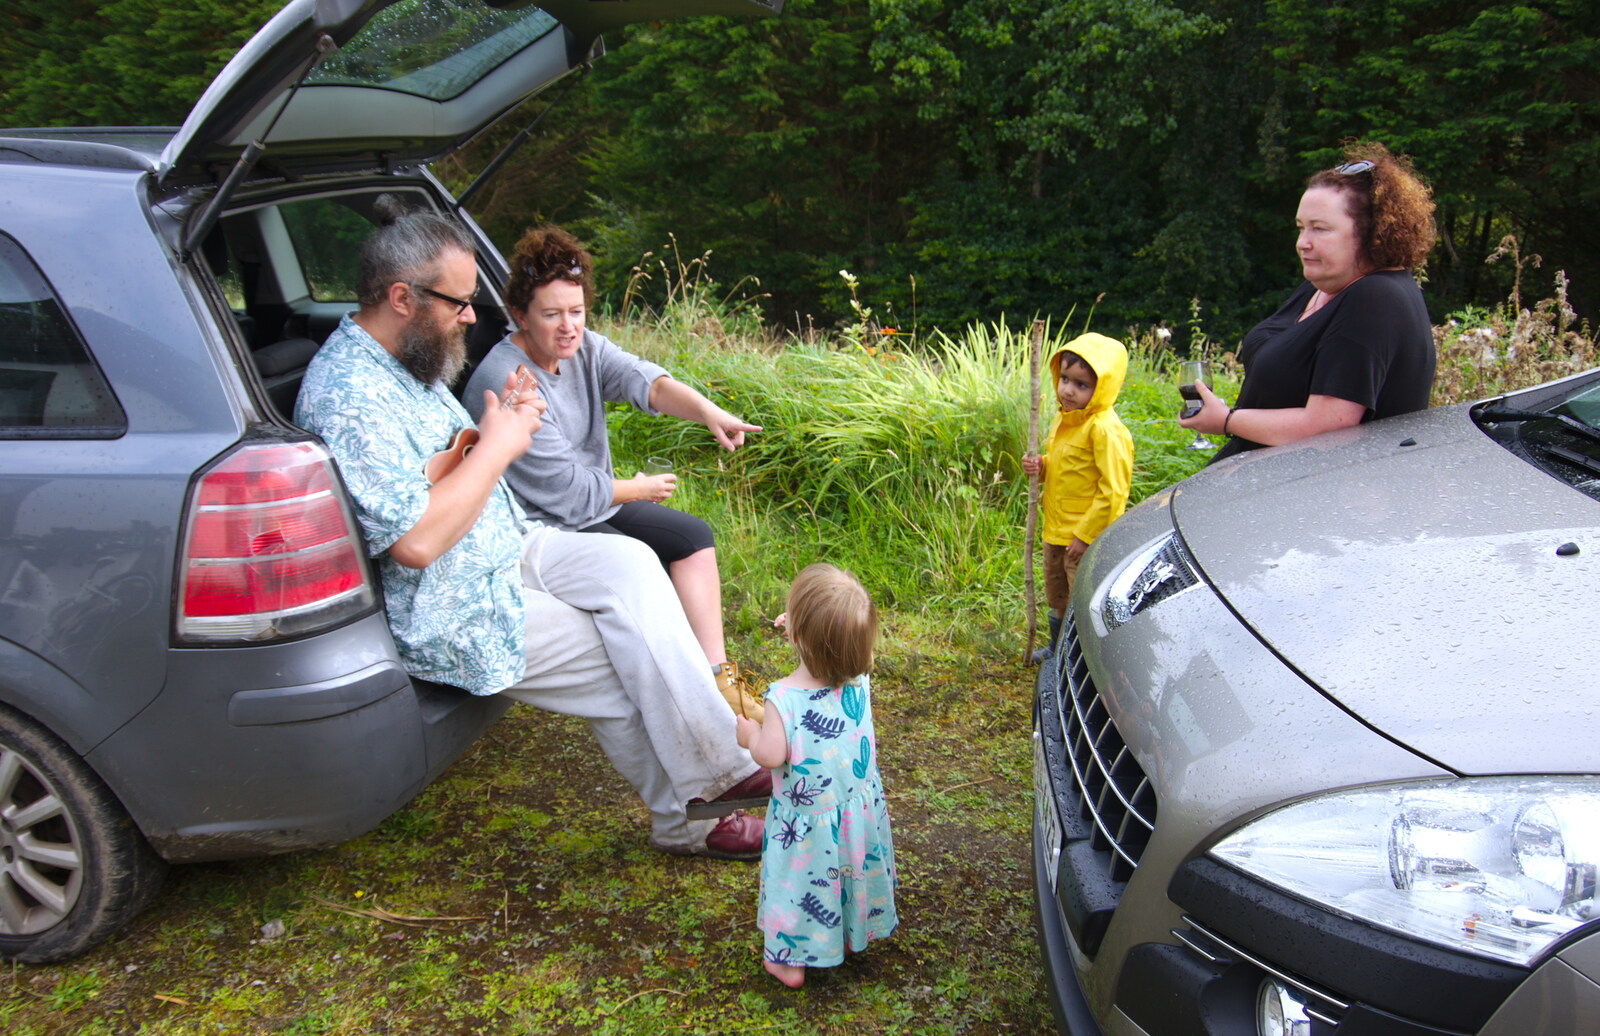 Hanging out in the car from Glencar Waterfall and Parke's Castle, Kilmore, Leitrim, Ireland - 18th August 2019